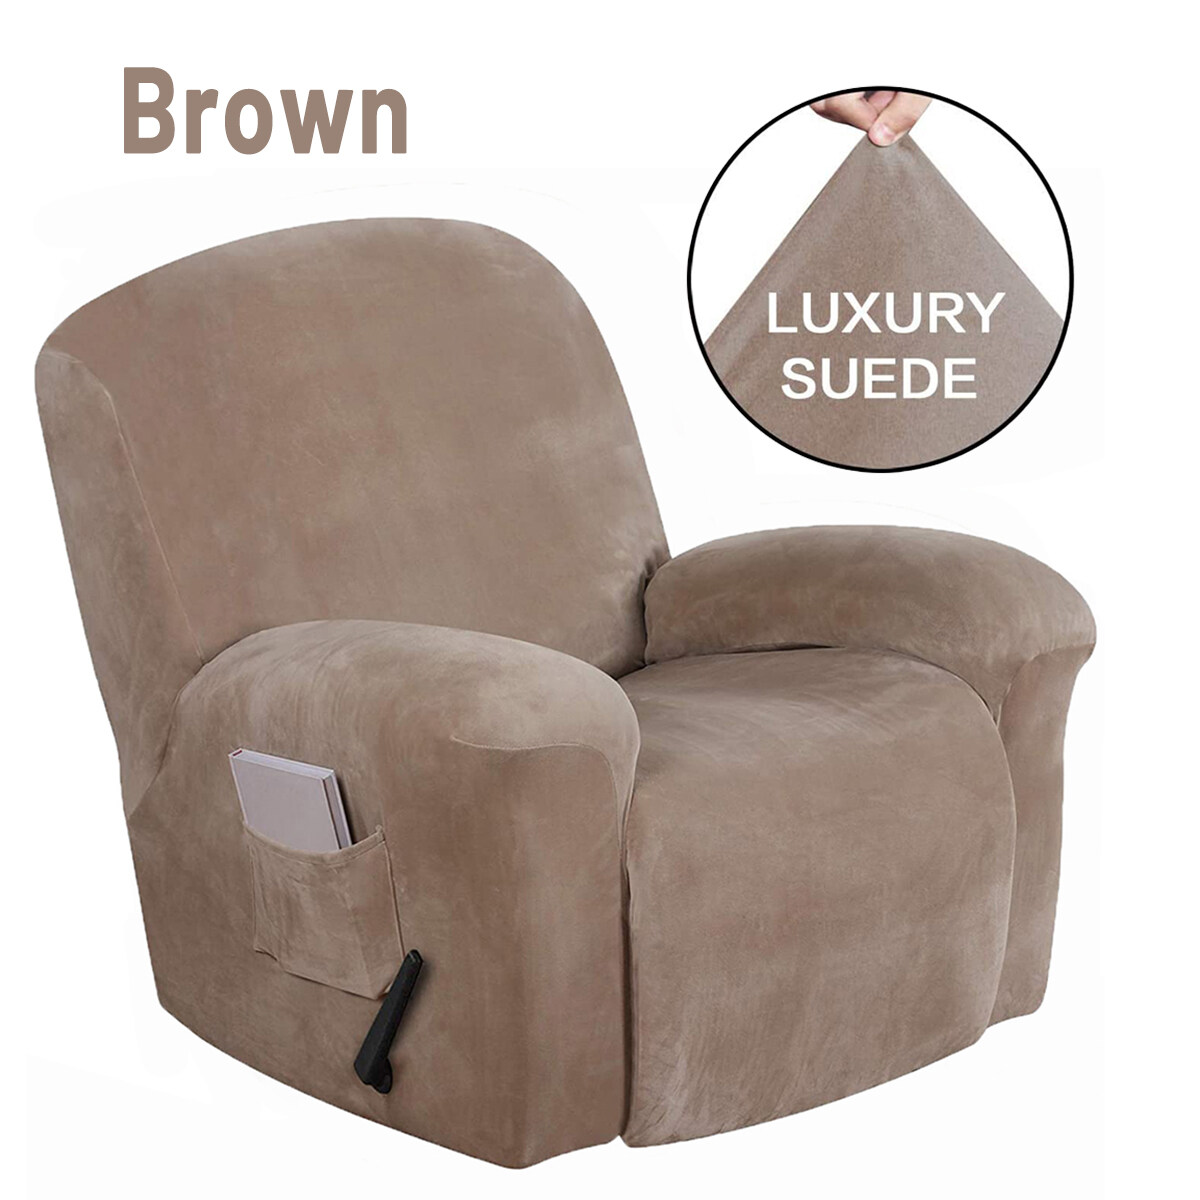 luxury chair covers